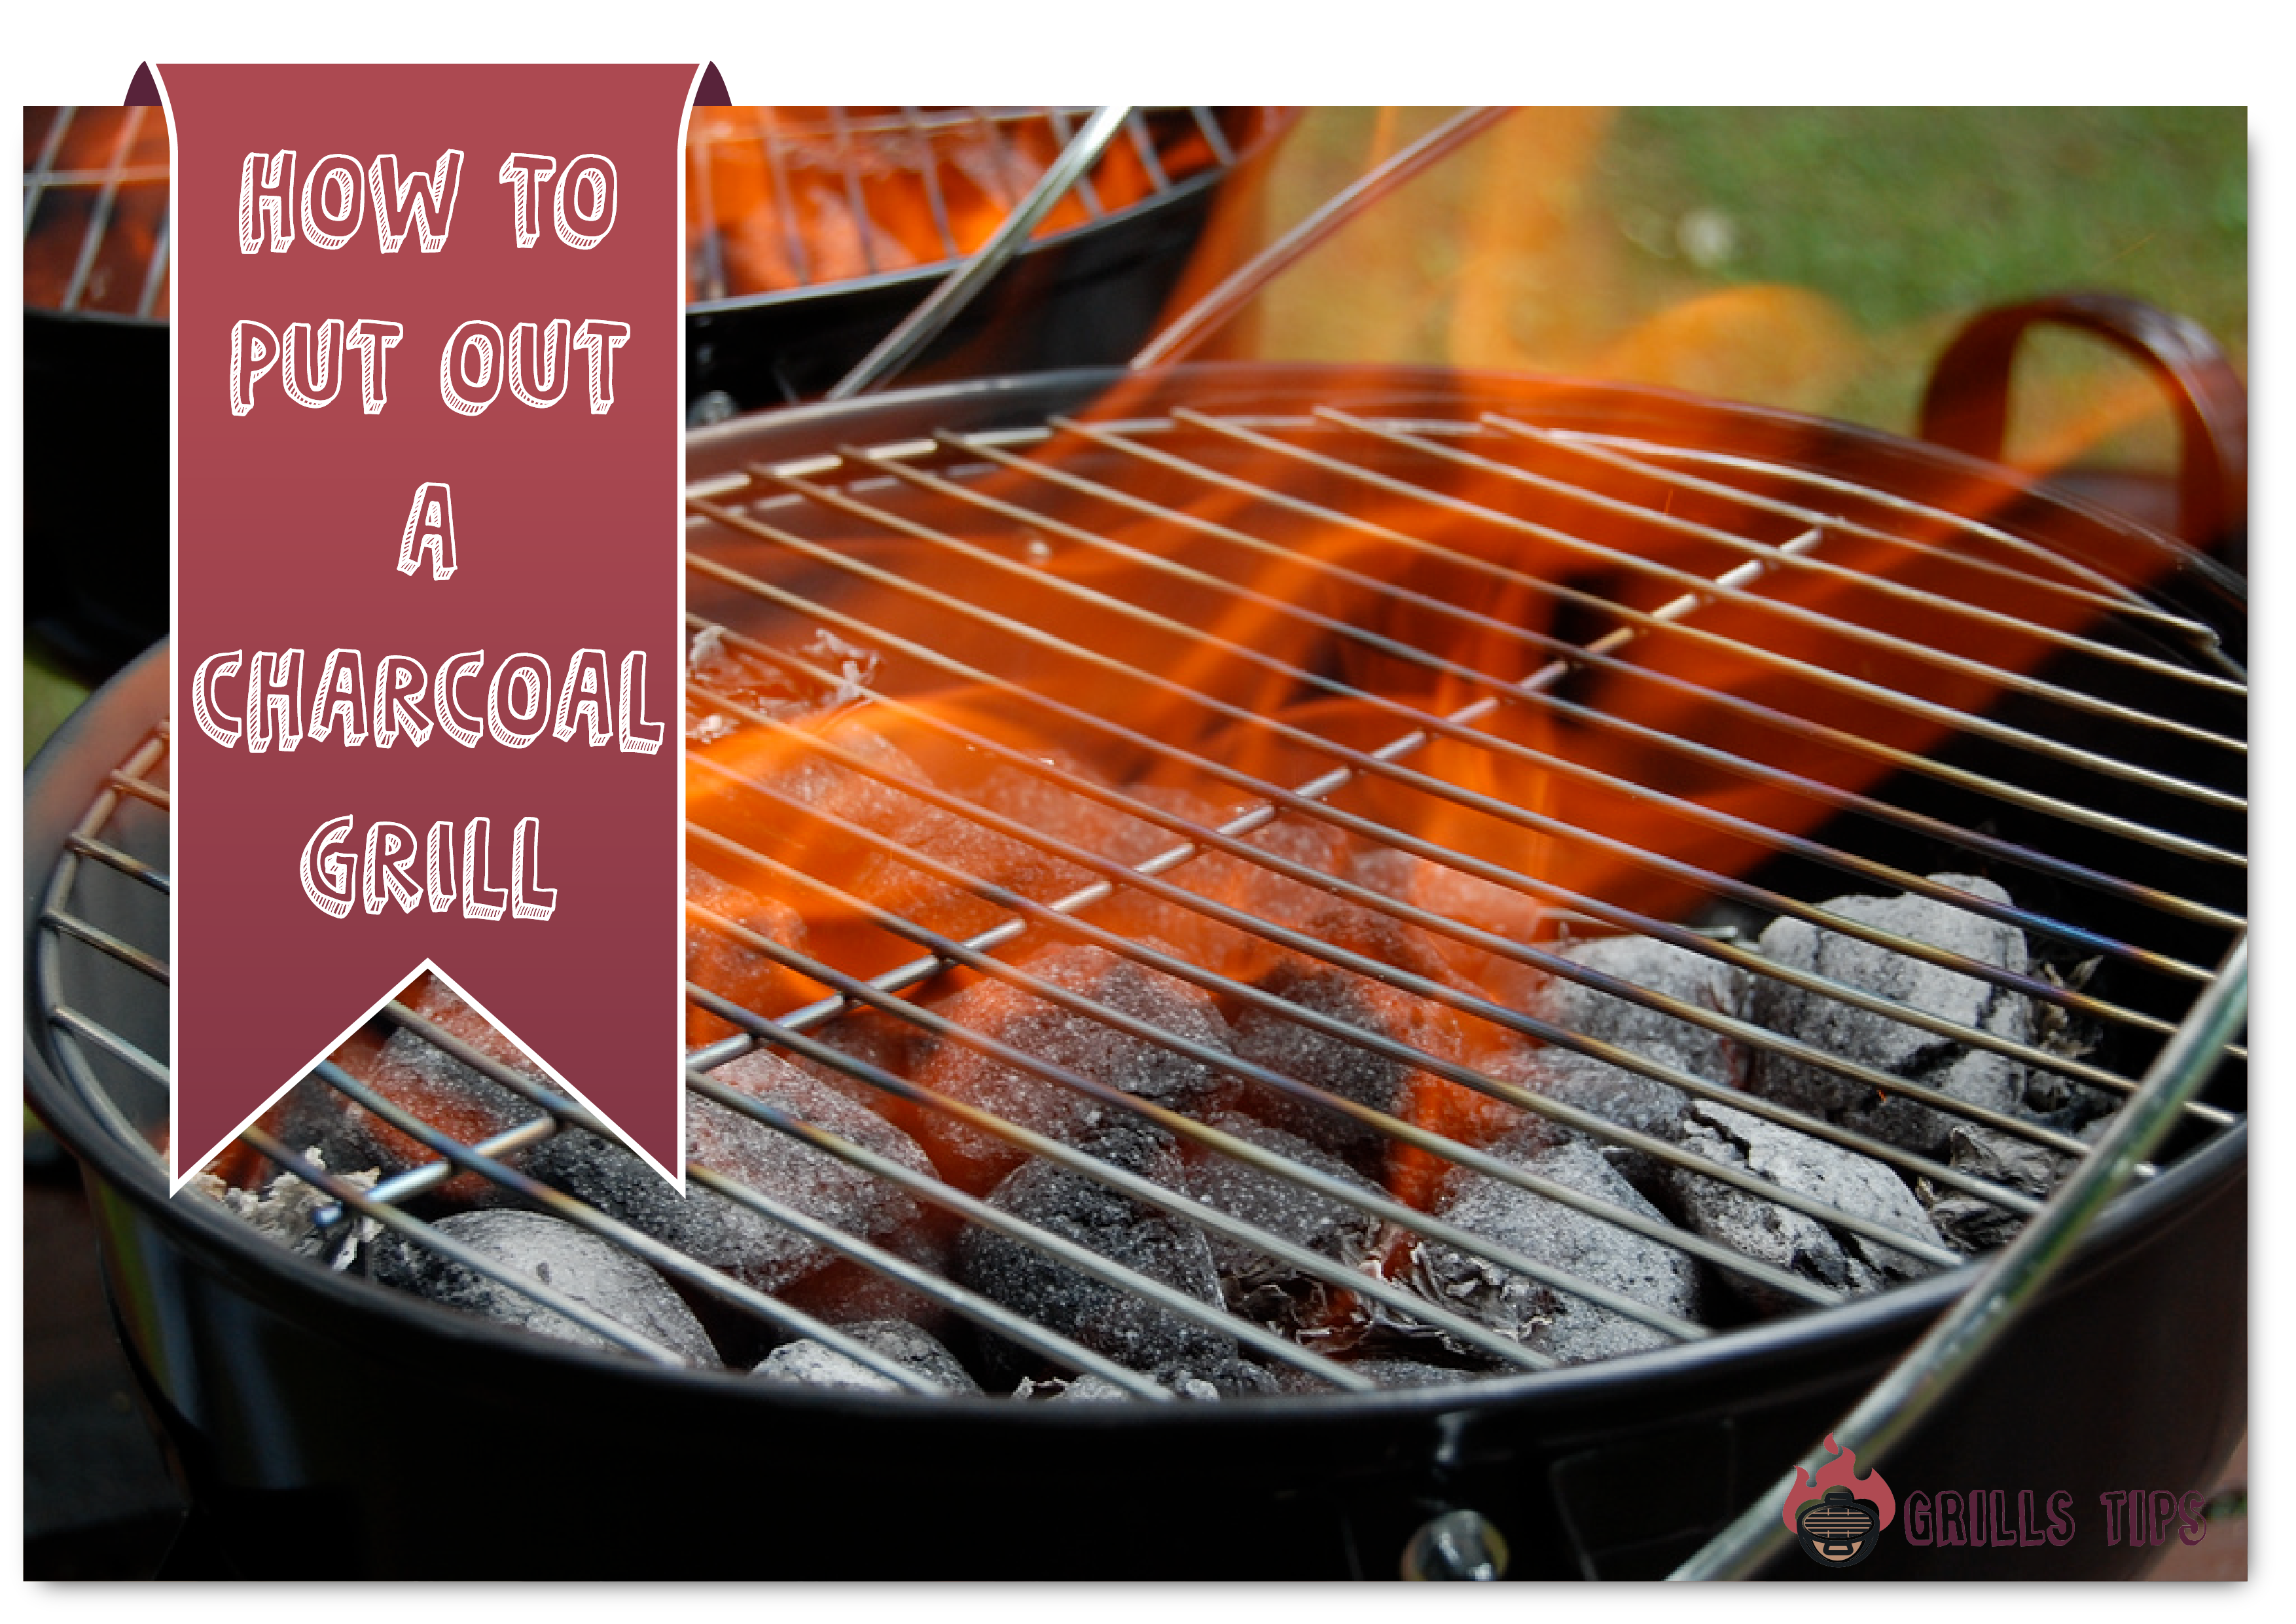  How To Put Out A Charcoal Grill